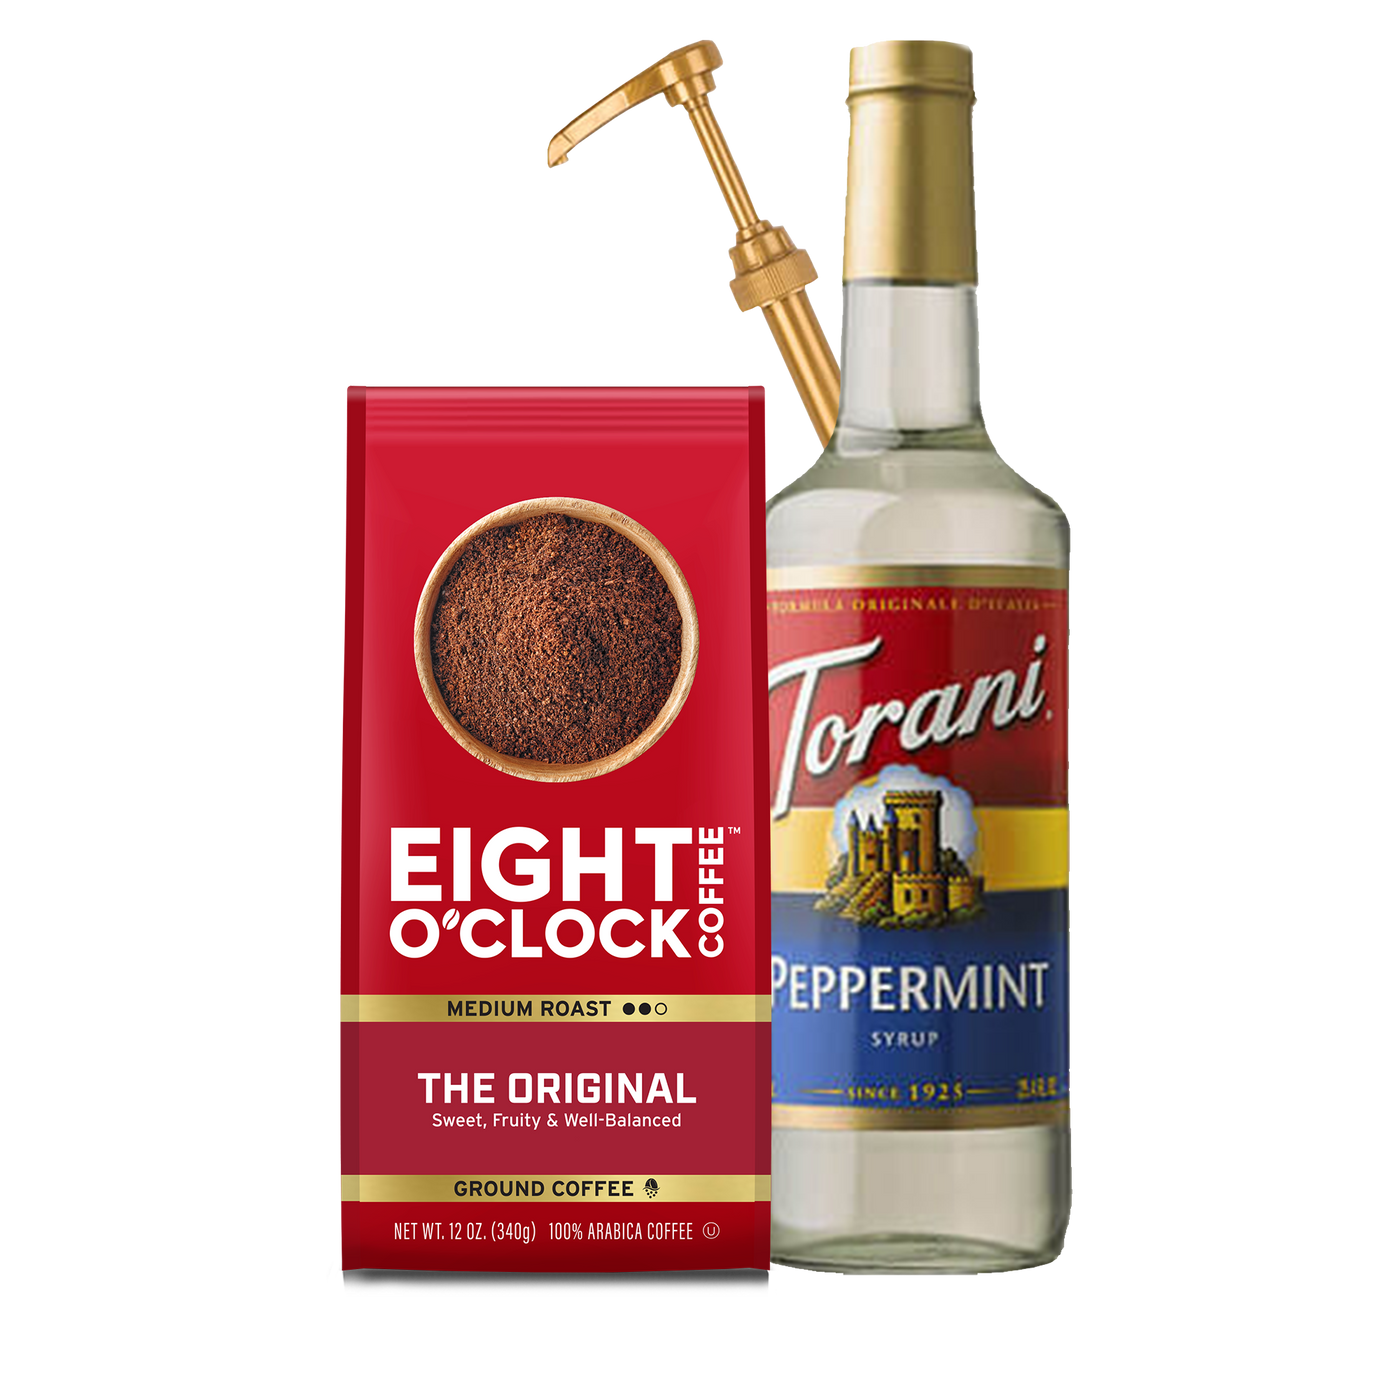 Peppermint Cappuccino Gift Set - Eight Oclock Coffee and Torani Peppermint Syrup